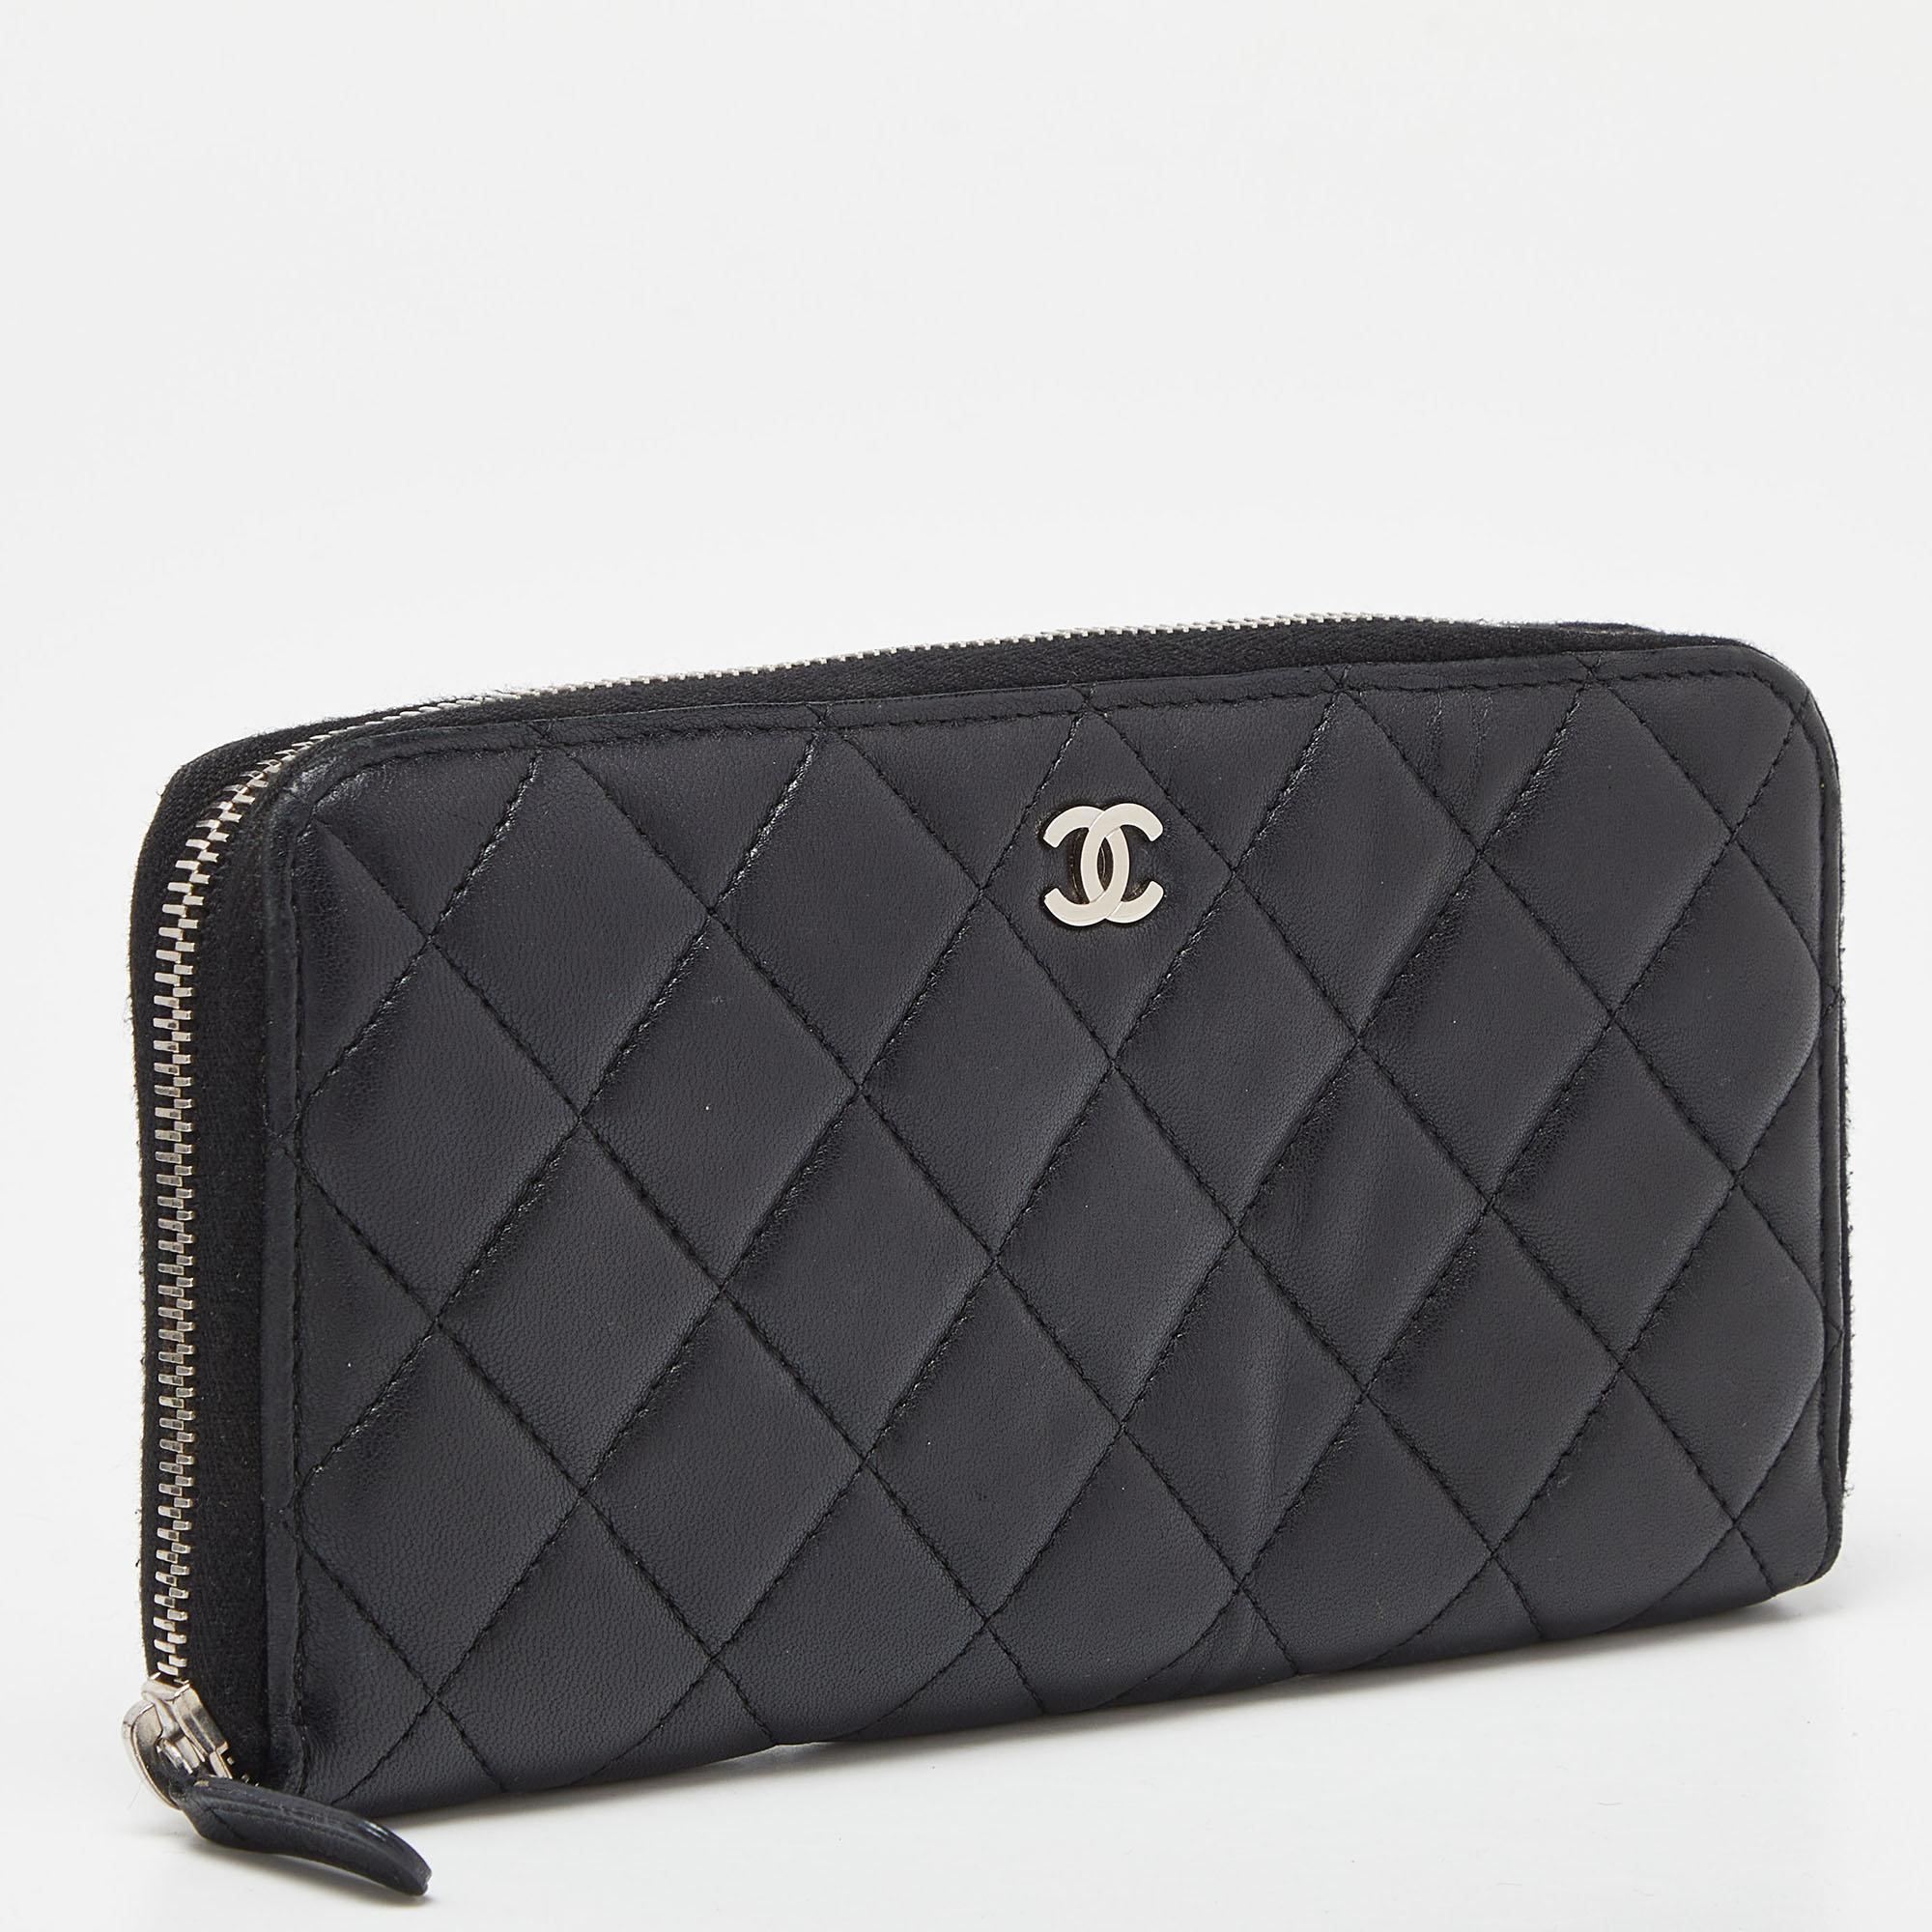 This Chanel wallet is carefully crafted to offer you a luxurious accessory you will cherish. It is marked by high quality and enduring appeal. Invest in it today!

Includes
Branded Dustbag